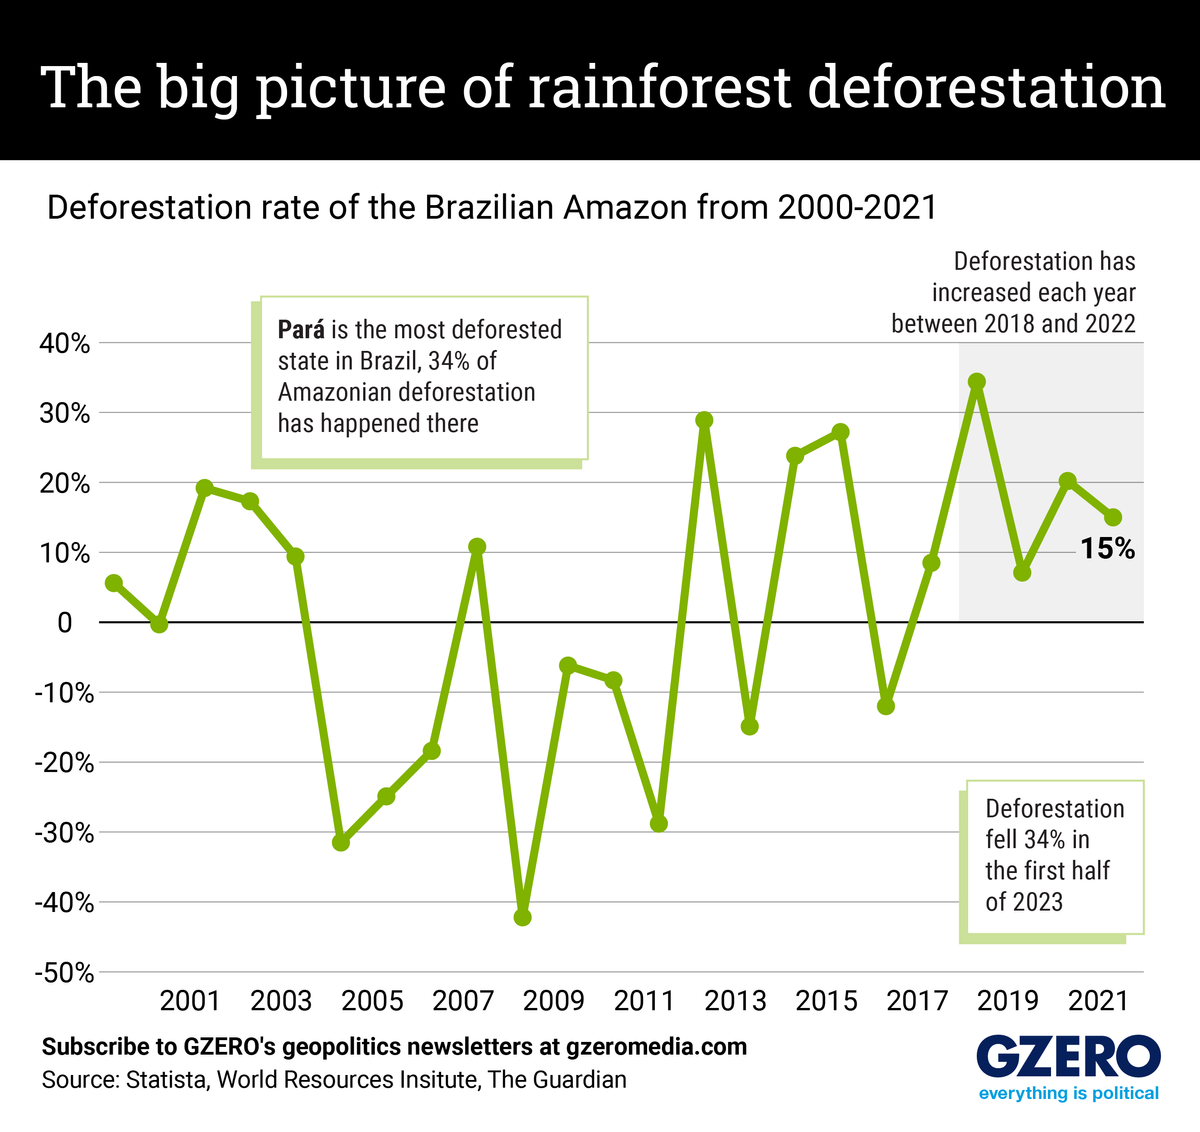 The Graphic Truth: The big picture of rainforest deforestation